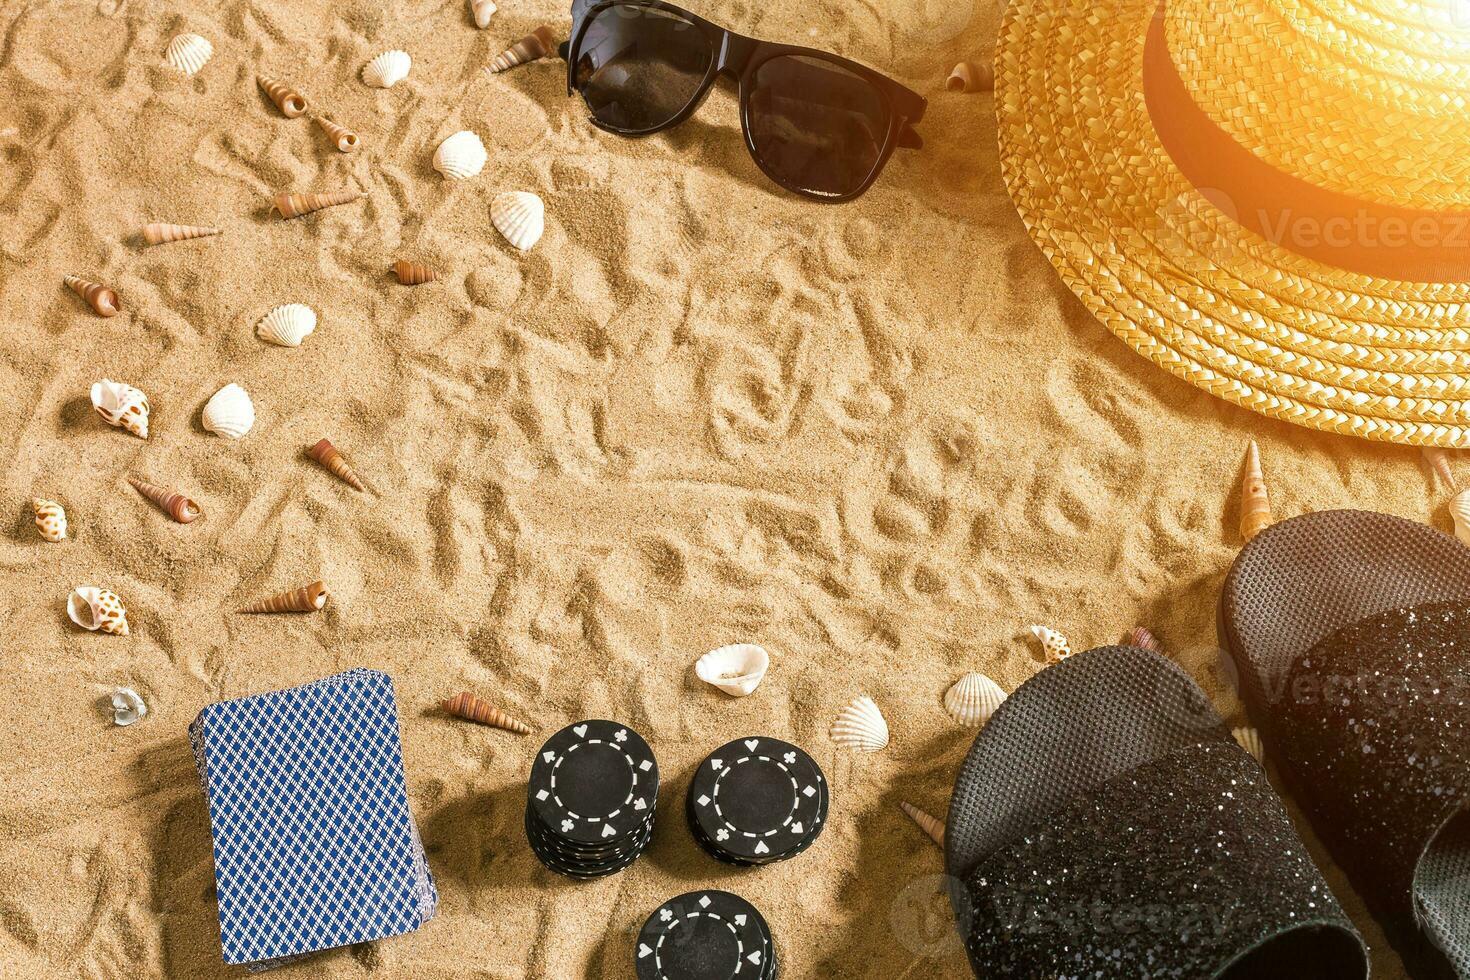 Beachpoker. Chips and cards on the sand. Around the seashells, sunglasses and flip flops. Top view photo